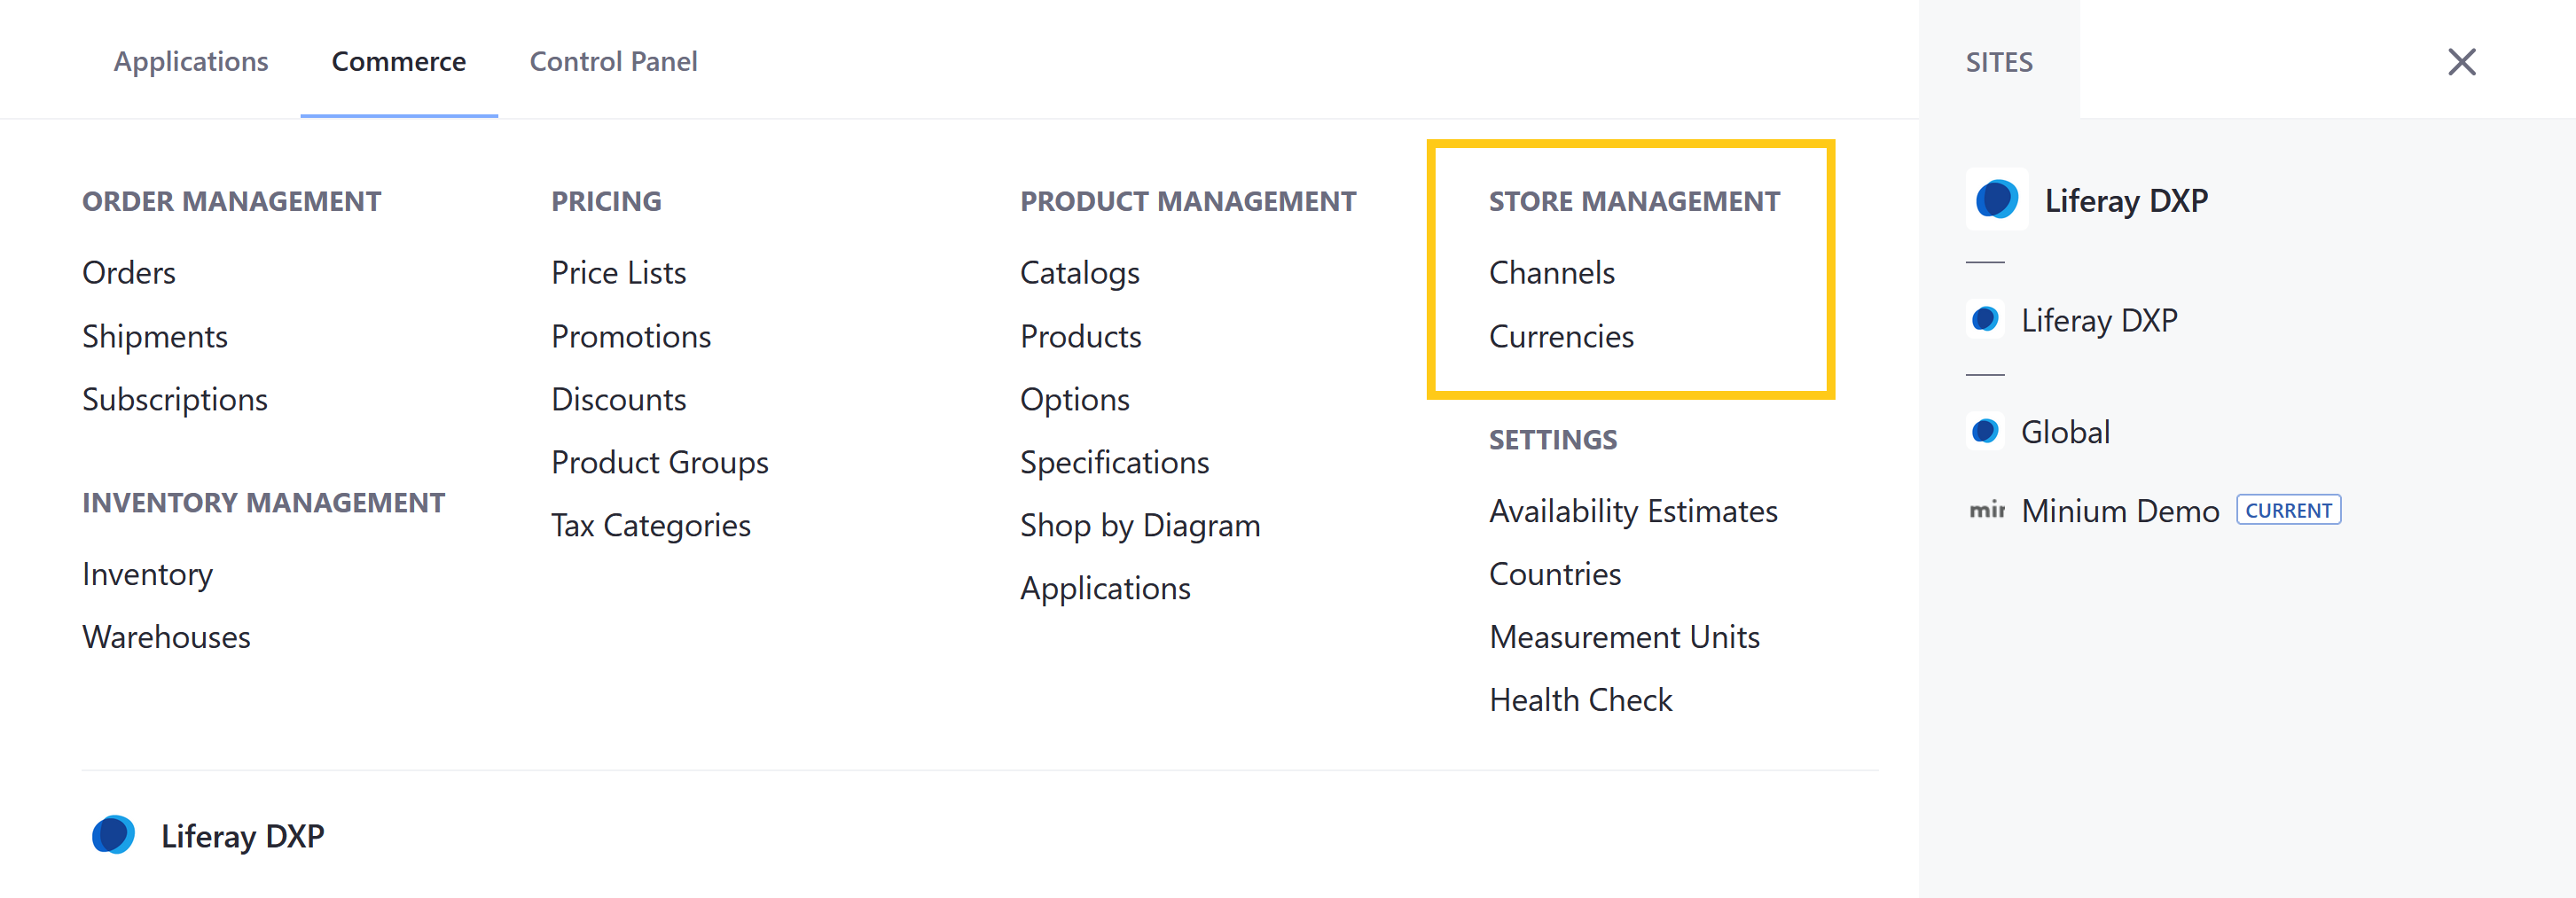 Control access to Store Management applications and resources.